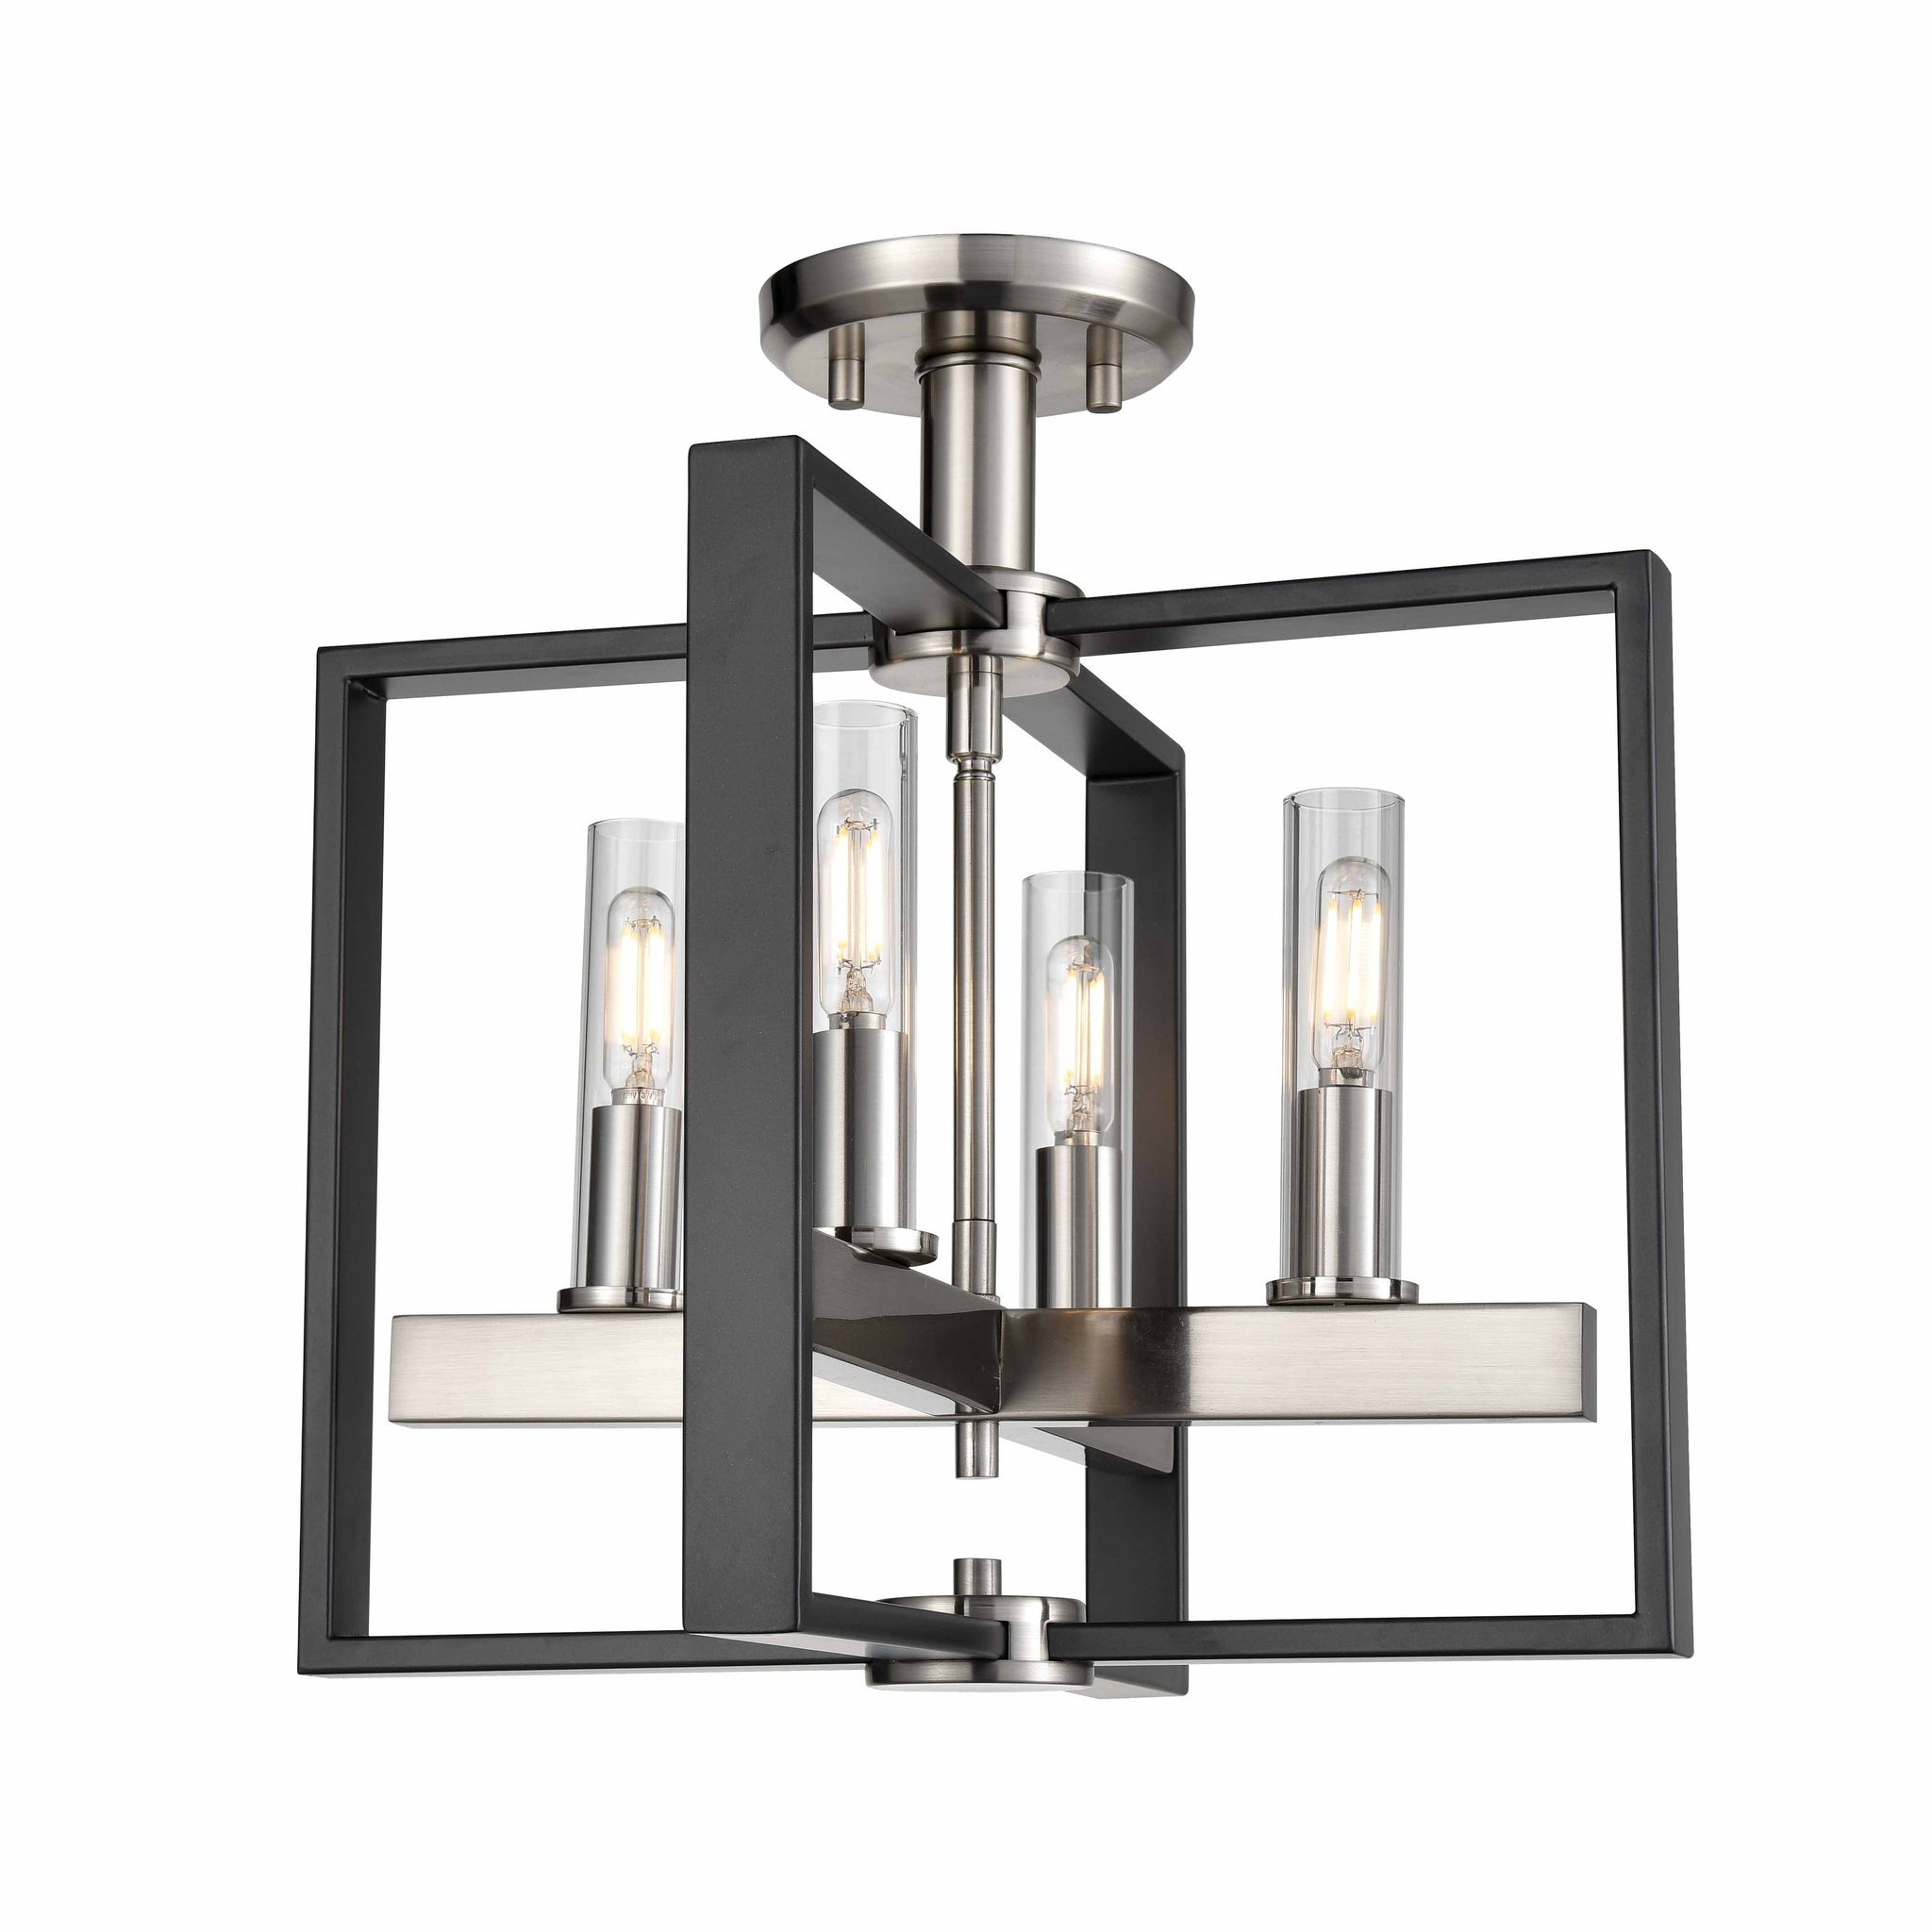 Blairmore Semi Flush Mount Satin Nickel and Graphite with Clear Glass